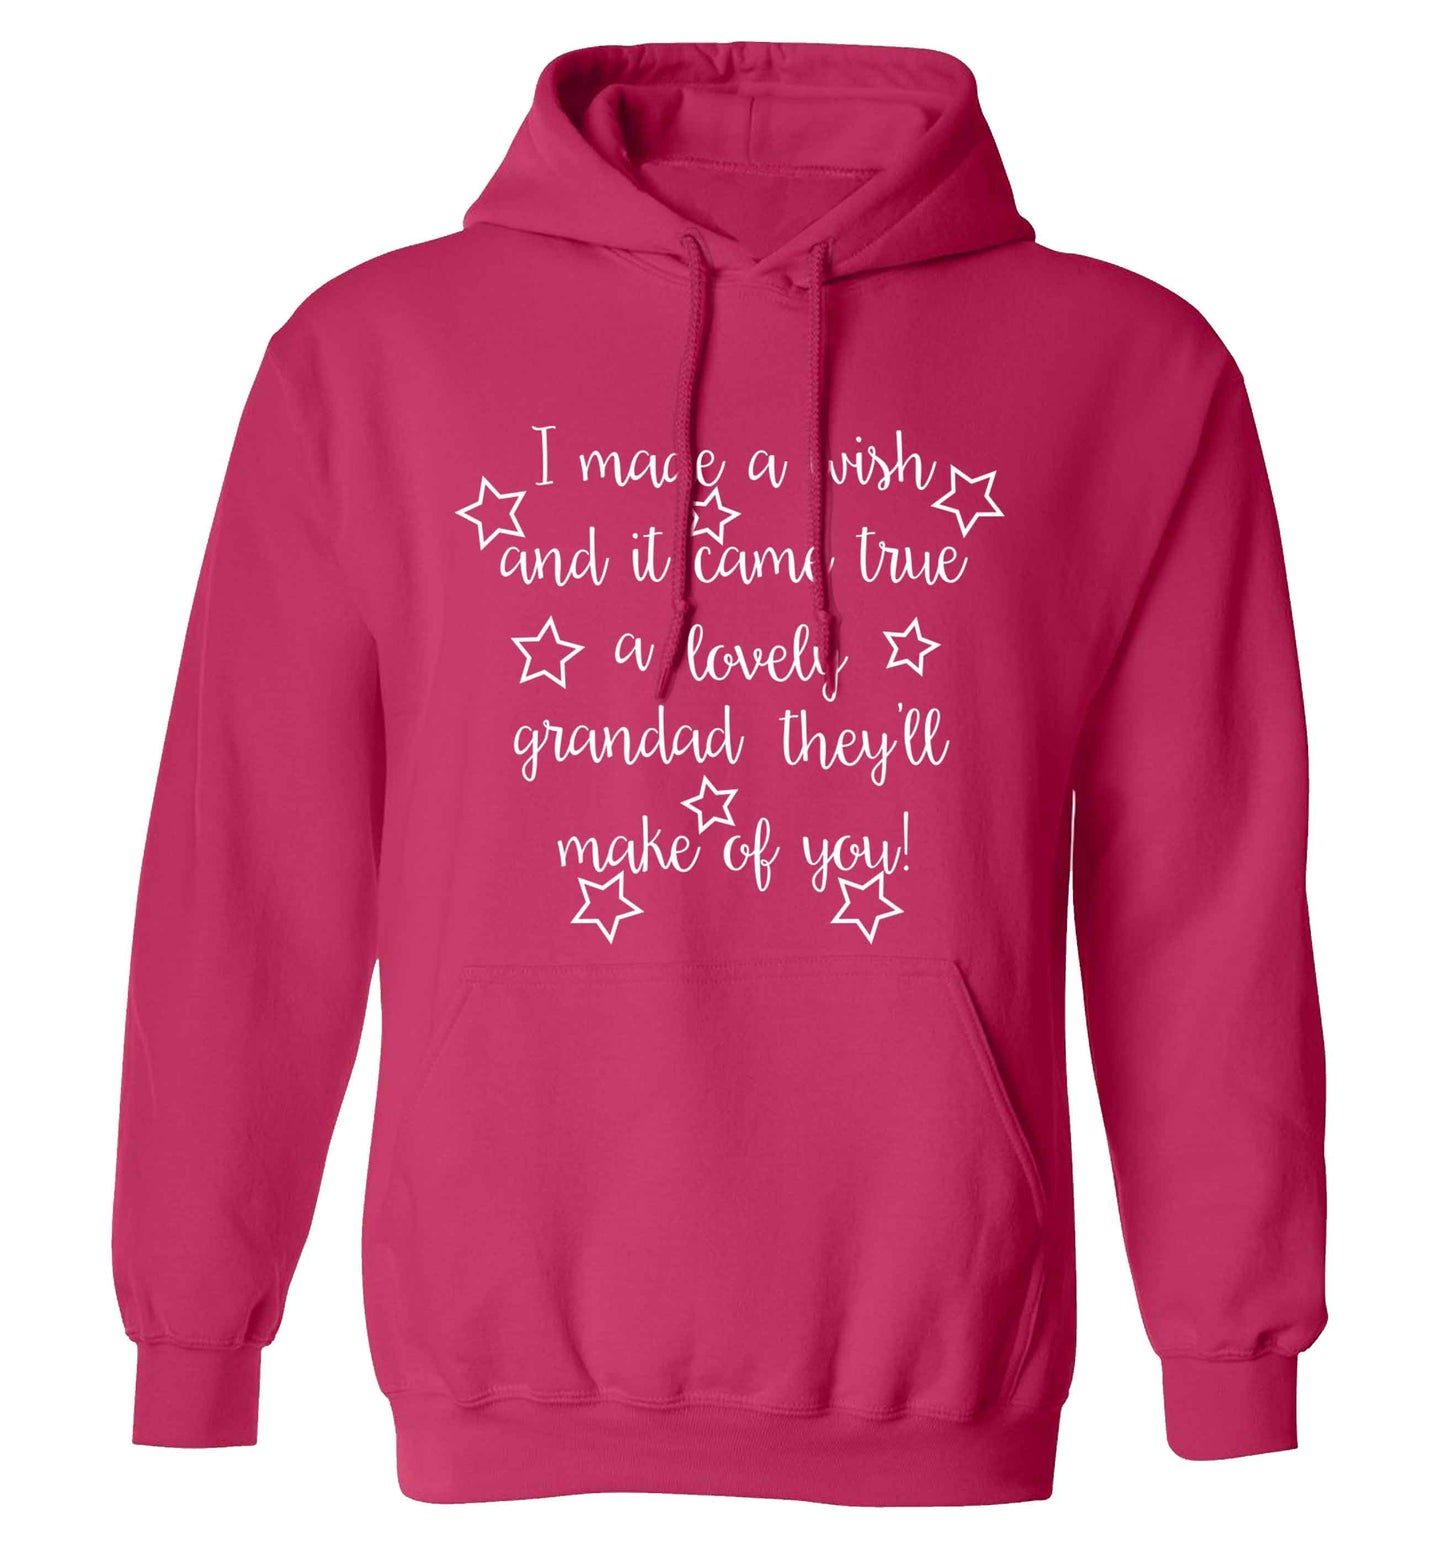 I made a wish and it came true a lovely grandad they'll make of you! adults unisex pink hoodie 2XL